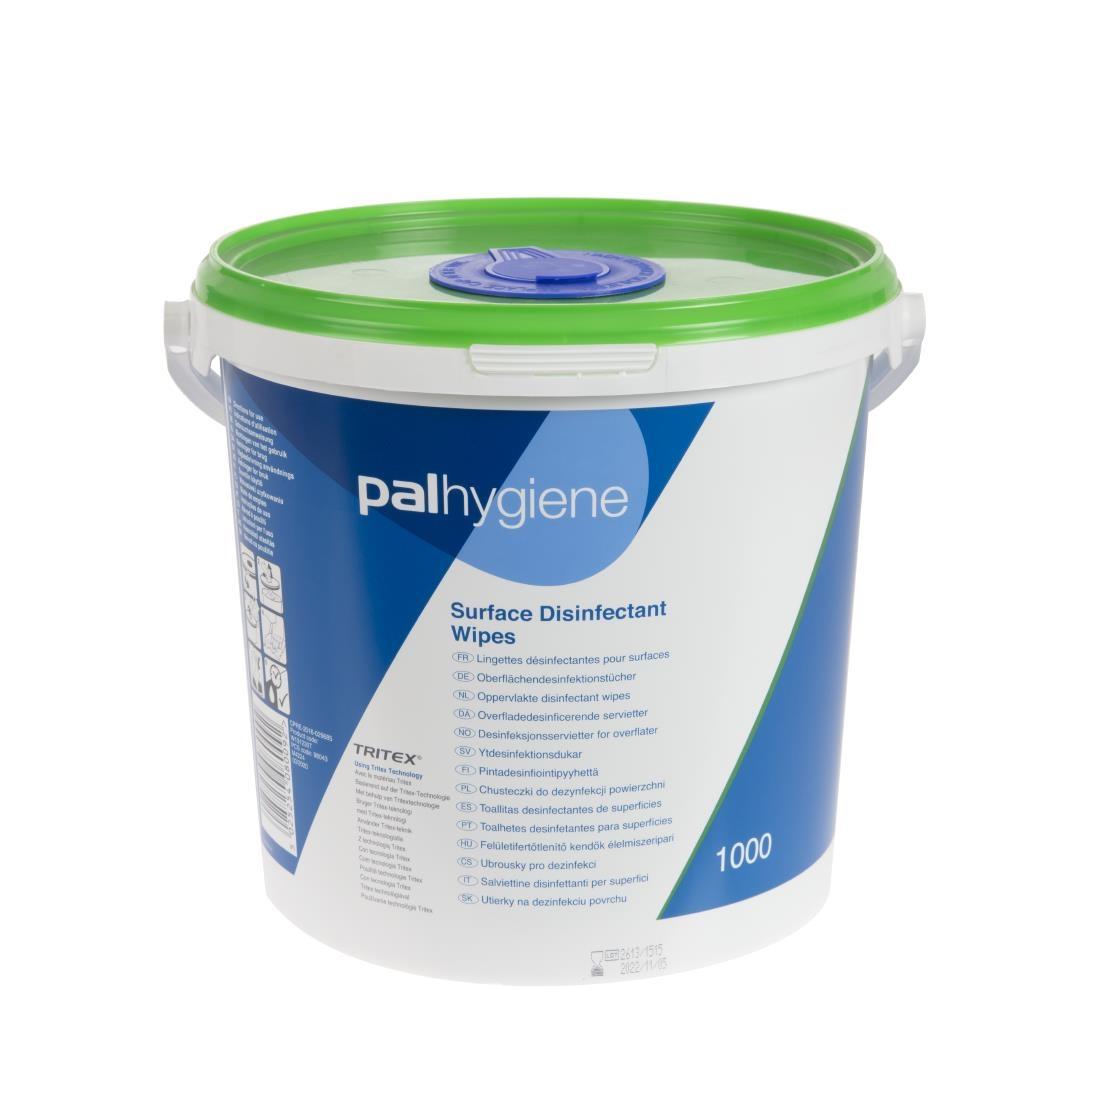 Pal TX Disinfectant Surface Wipes (1000 Pack) - J860  - 6